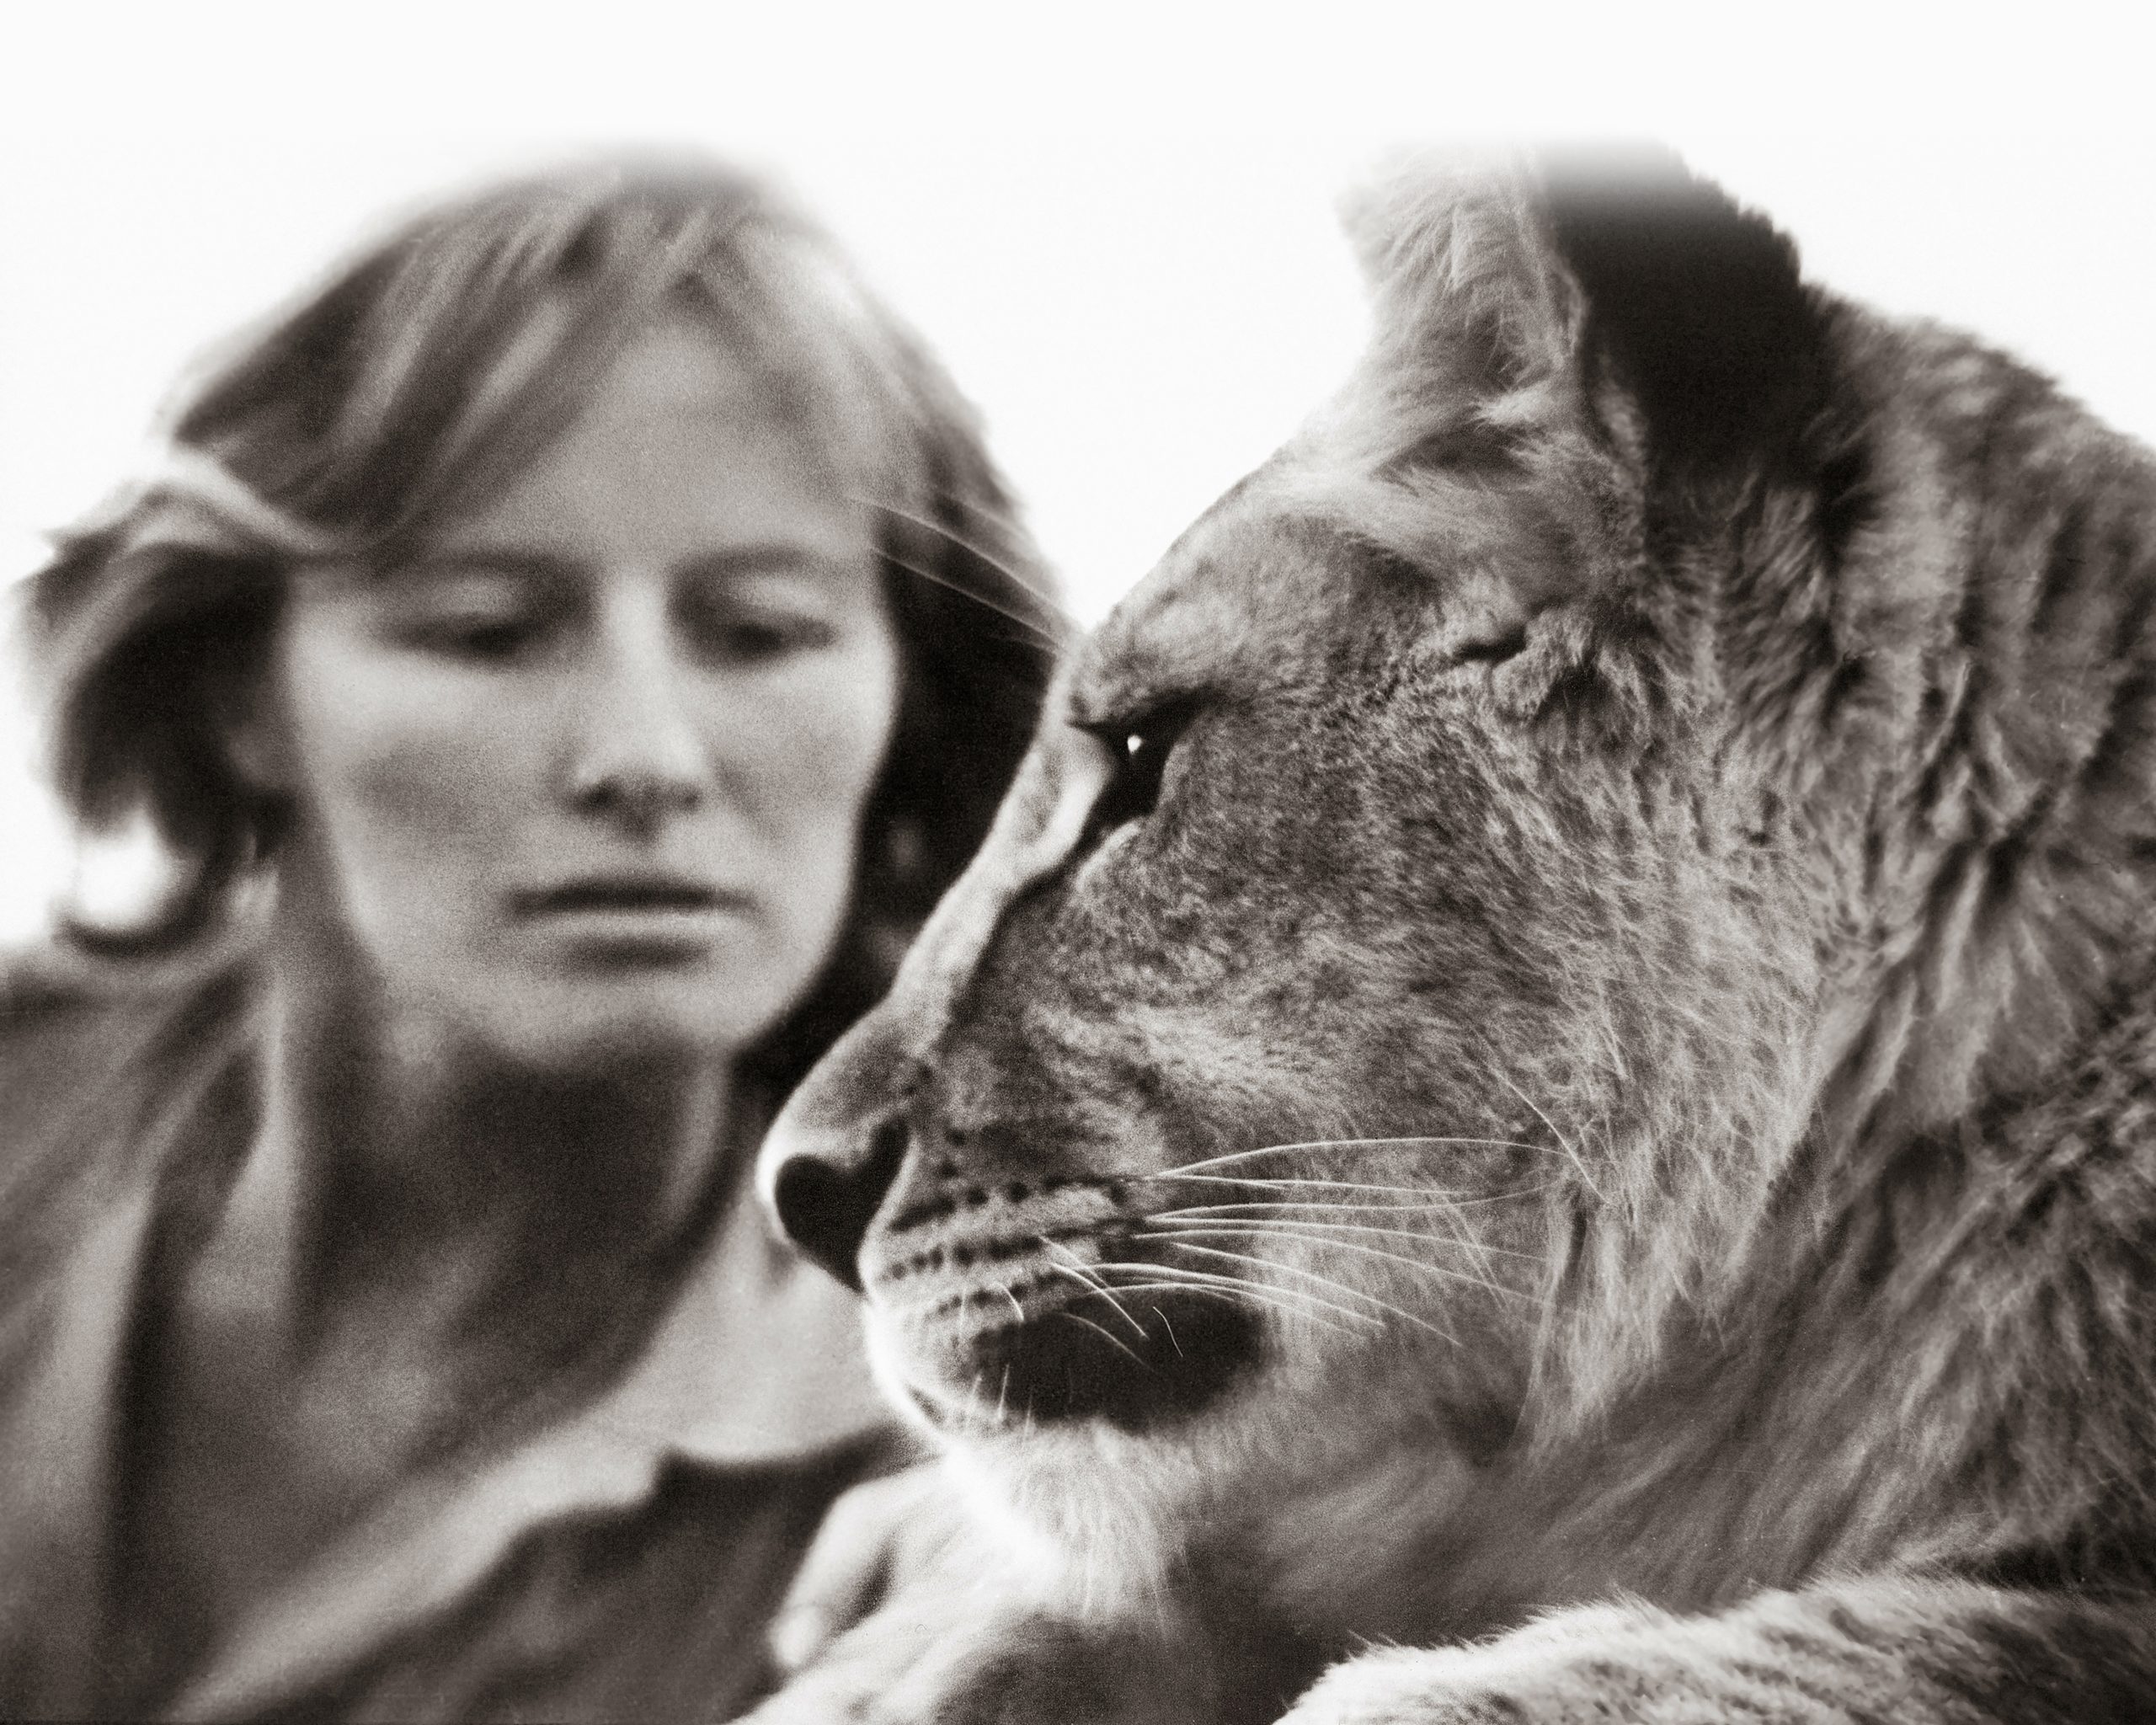 Virginia McKenna during the filming of Born Free, with the lioness 'Girl'